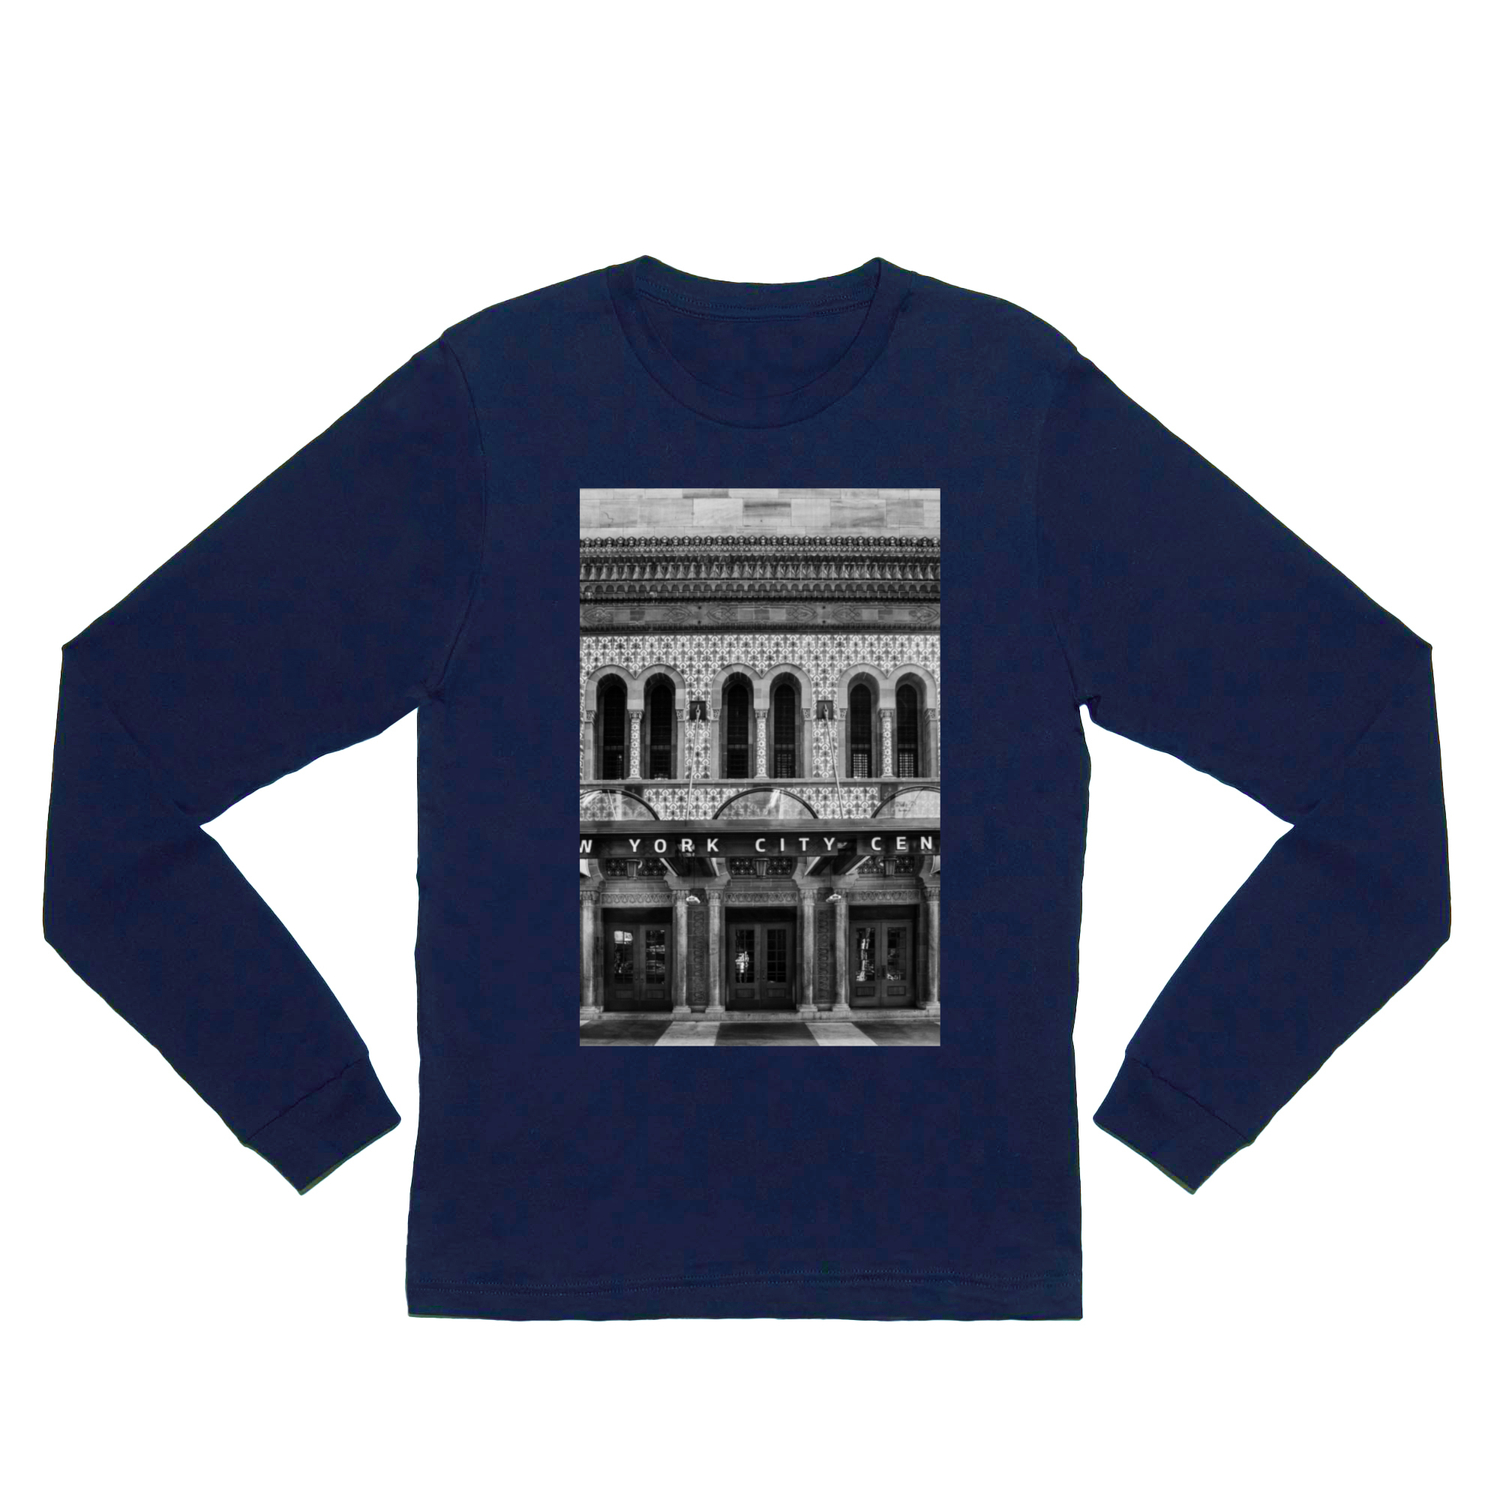 schuur eer Encyclopedie New York City Center. Long Sleeve T Shirt by davehare | Society6